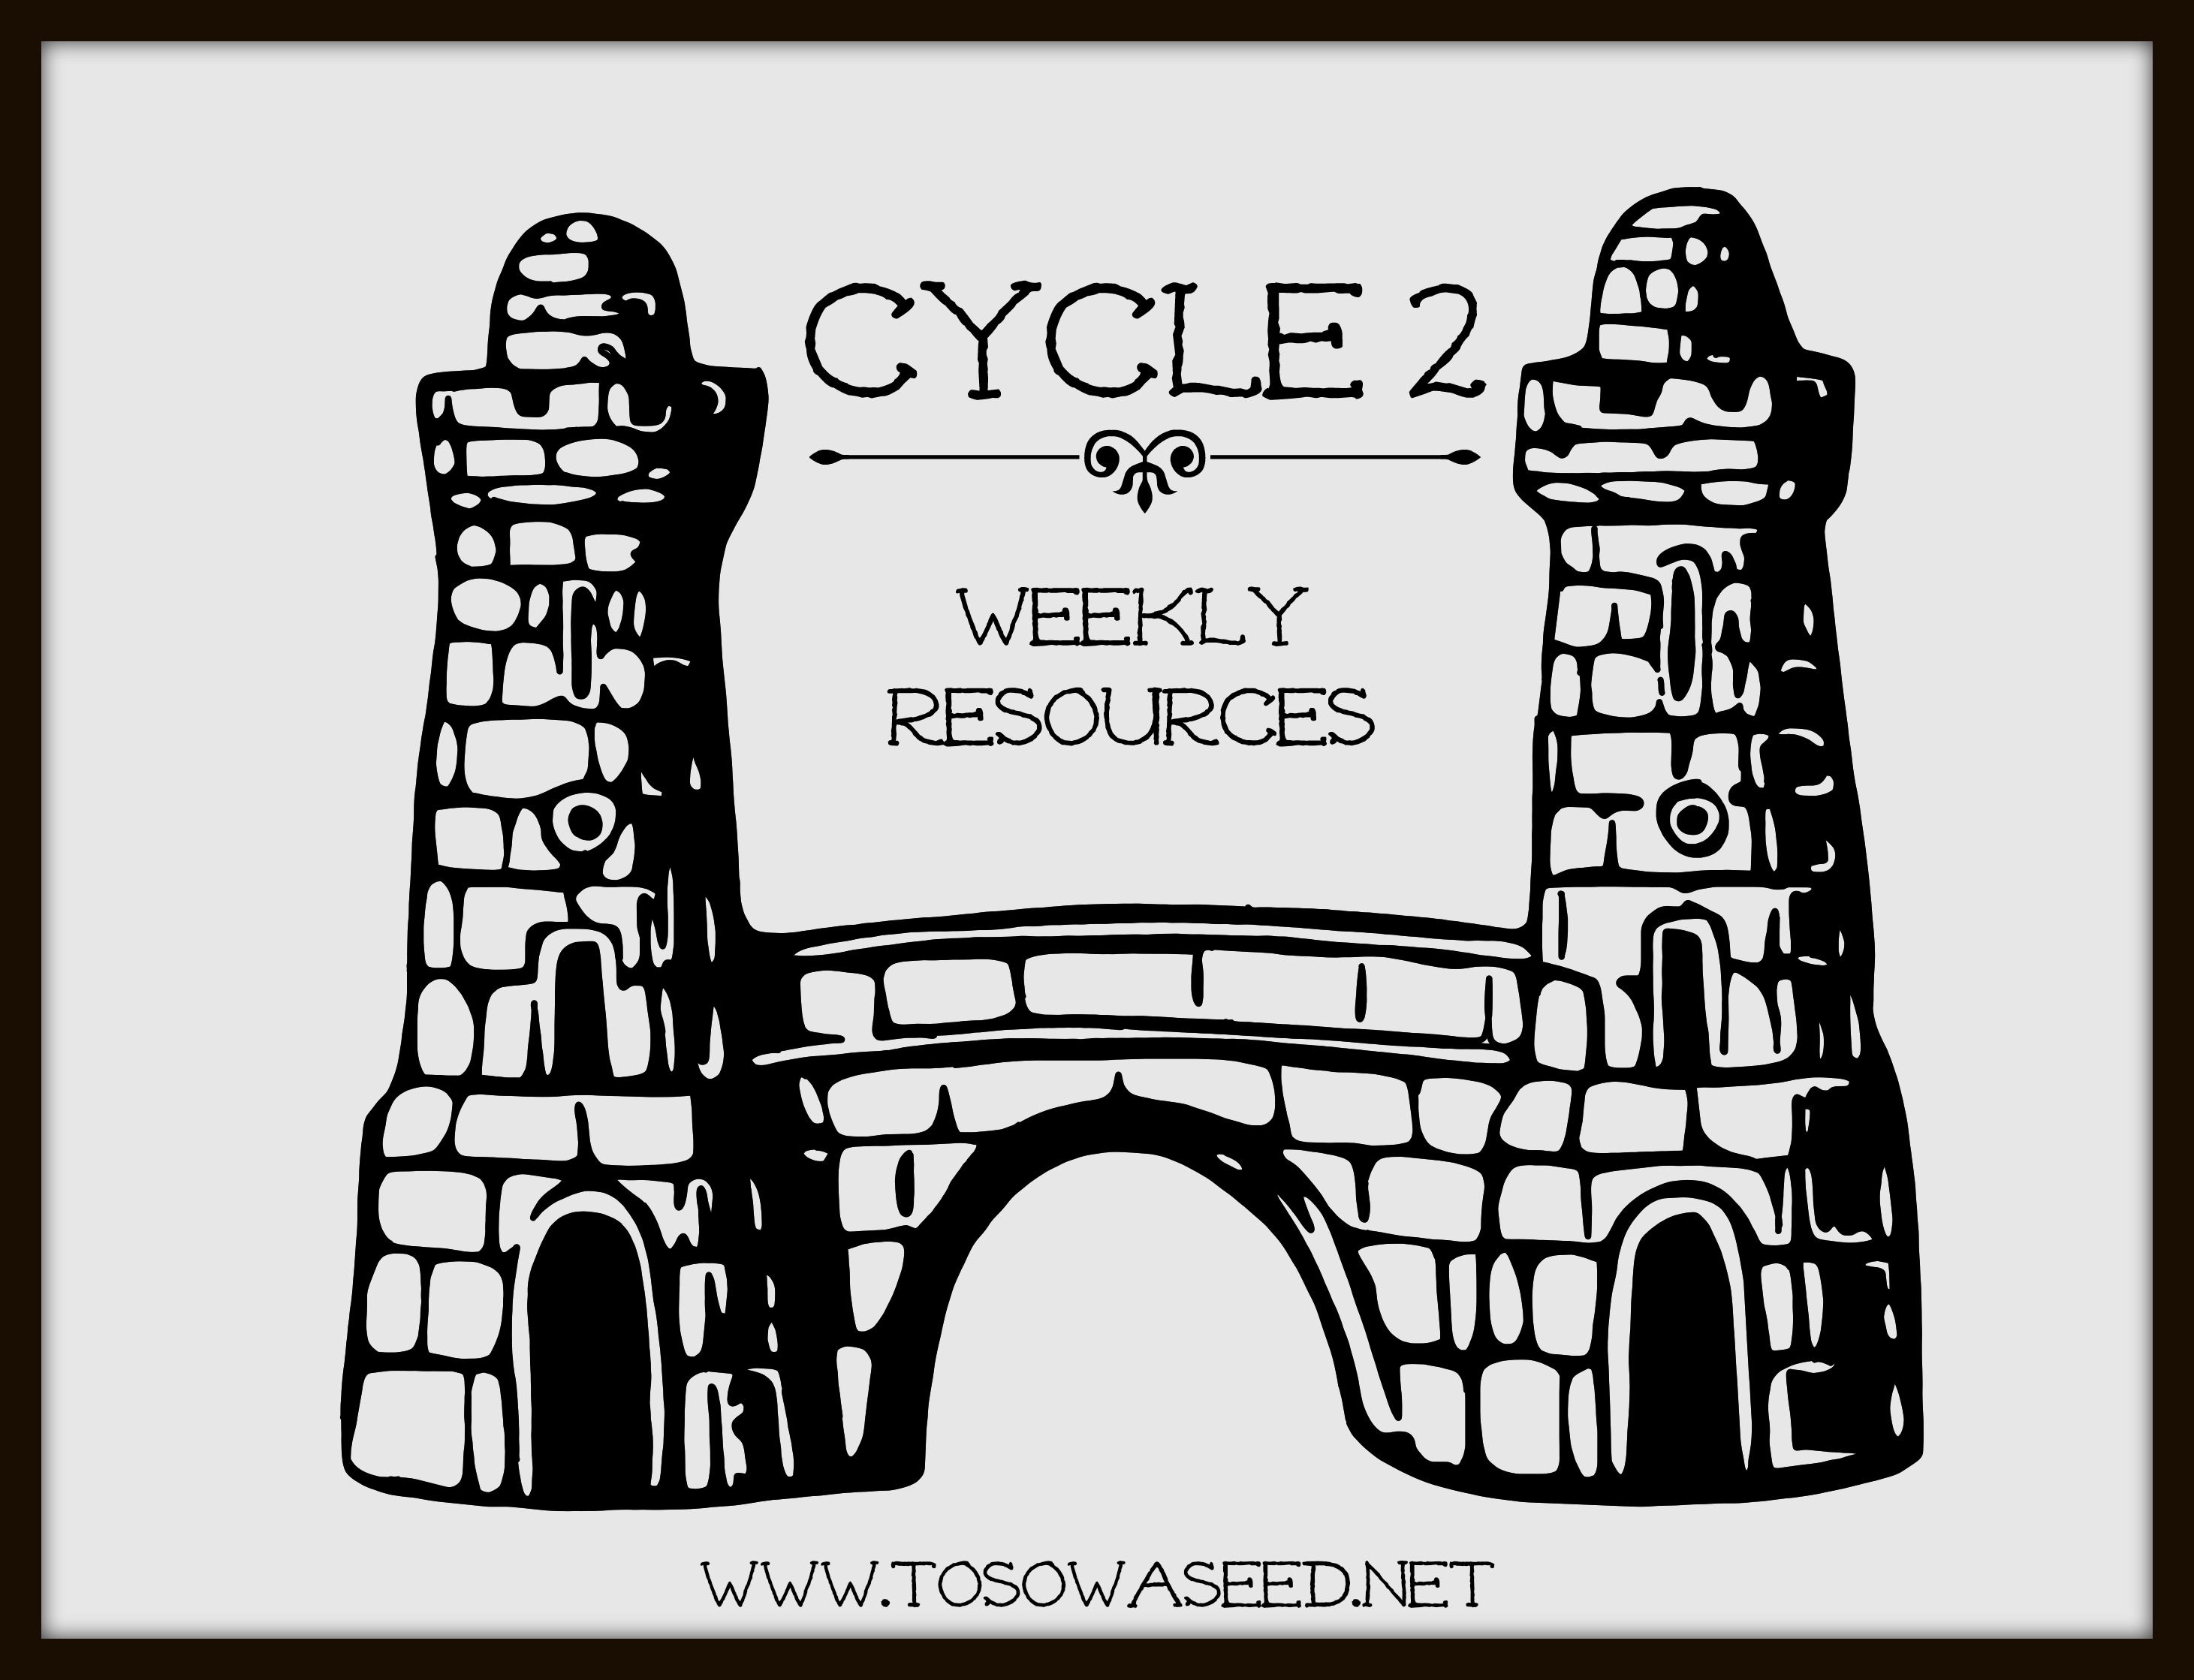 Cycle 2 Weekly Resources